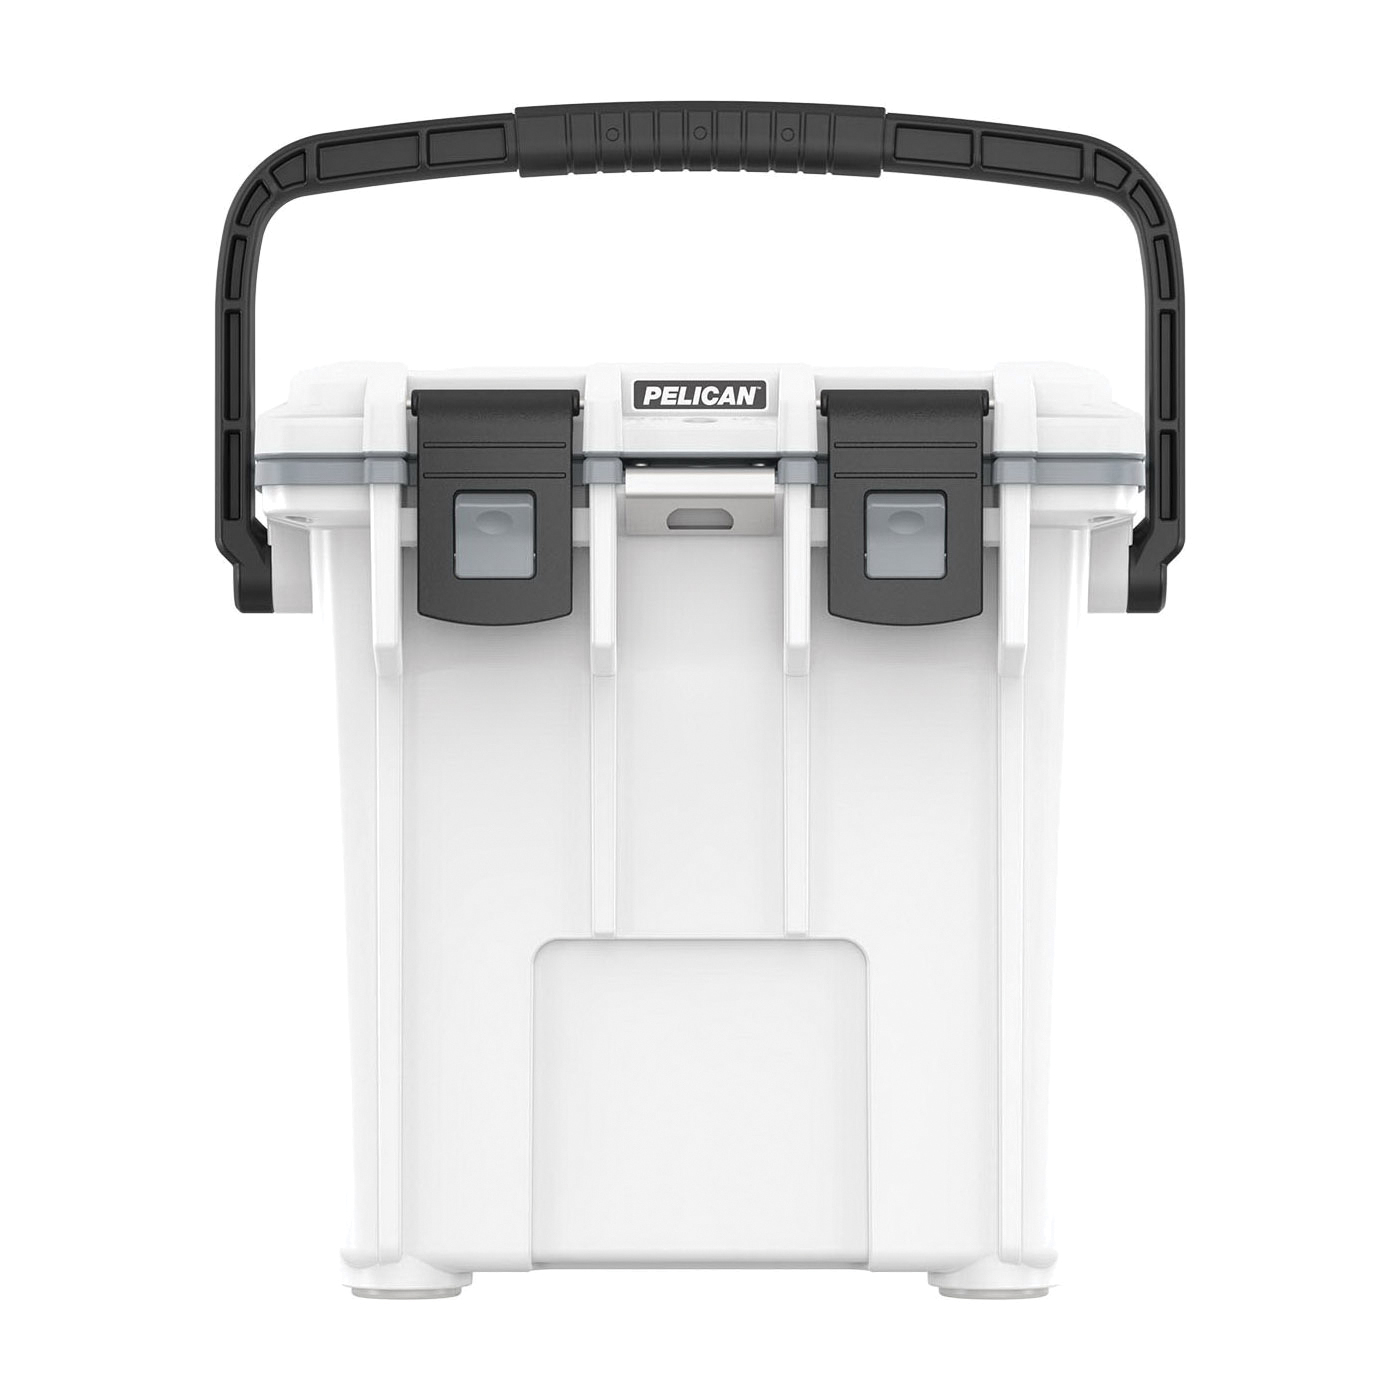 PELICAN™ 20Q-1-WHTGRY Elite Cooler, 21.5 qt Volume, 15 Can, 0.78 in Thick Insulation, Press/Pull Latch Closure